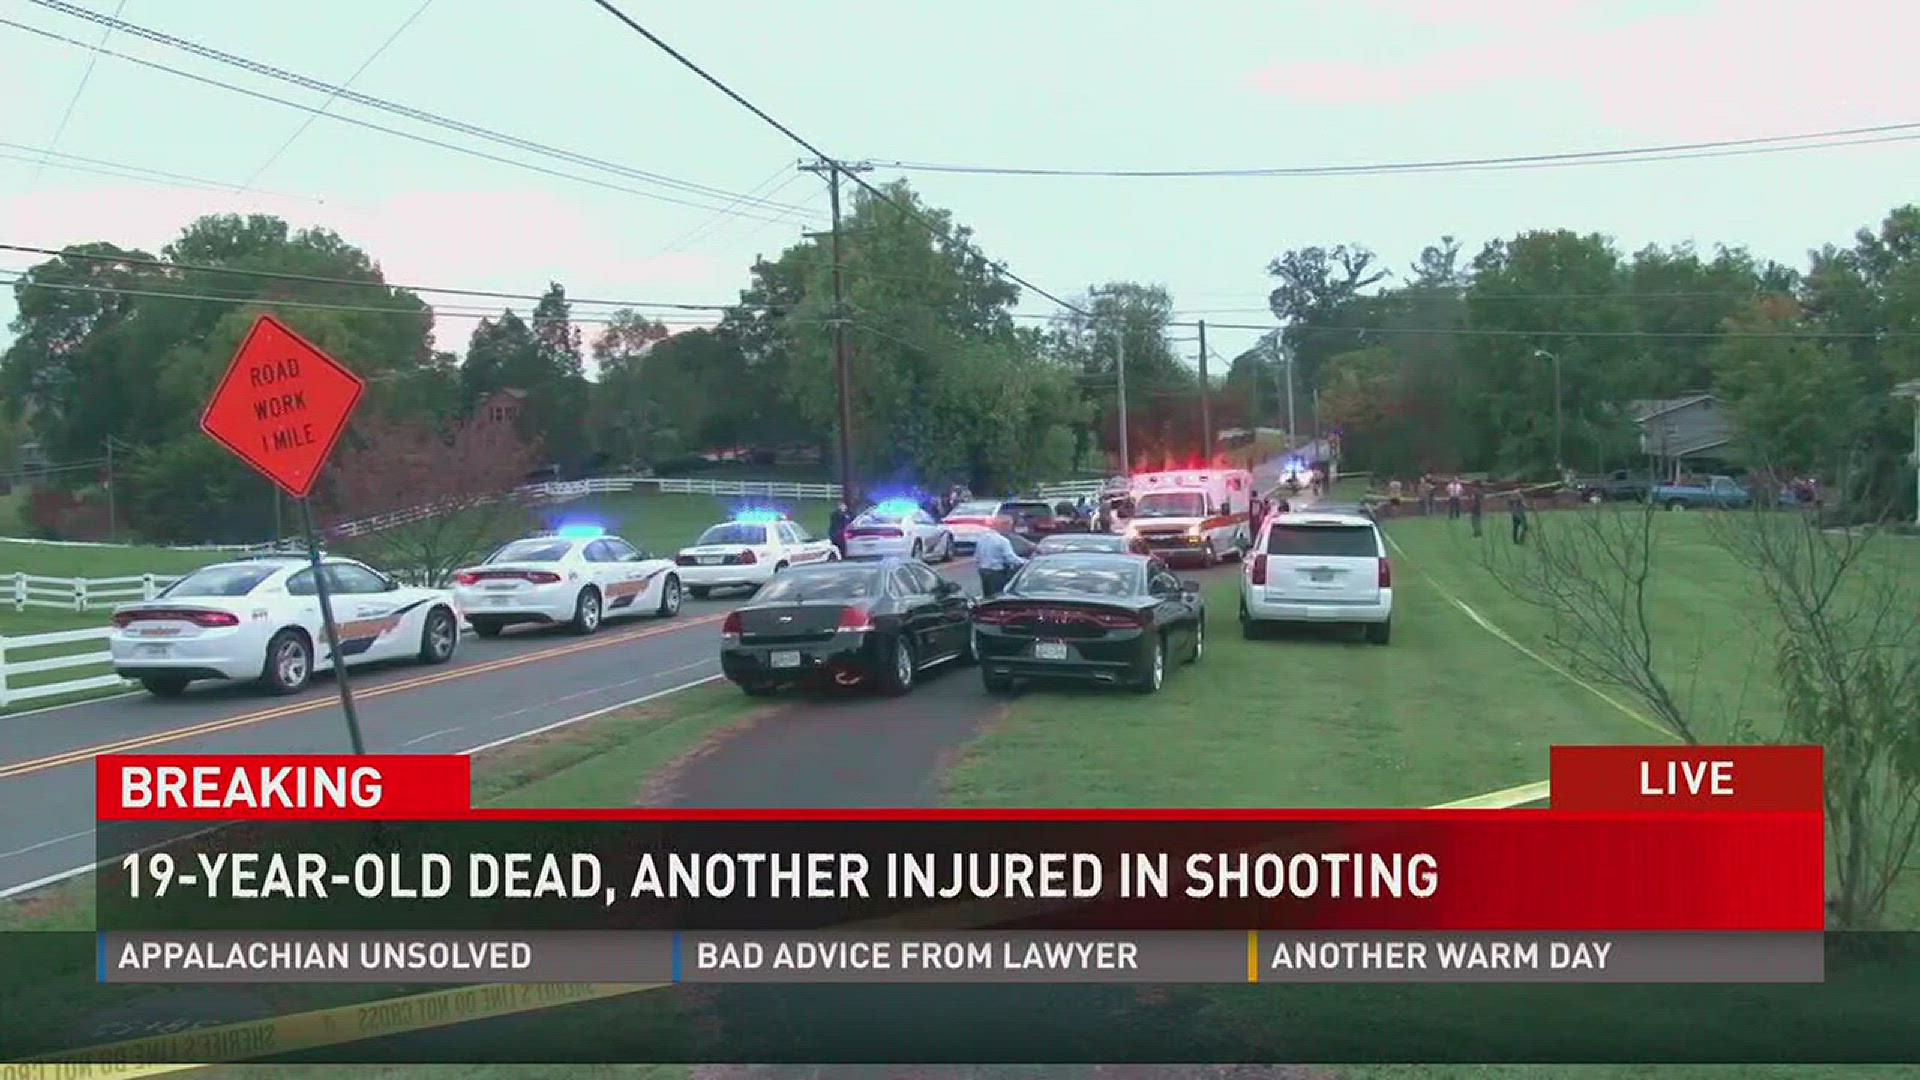 Coverage continues for the shooting in a Powell neighborhood.